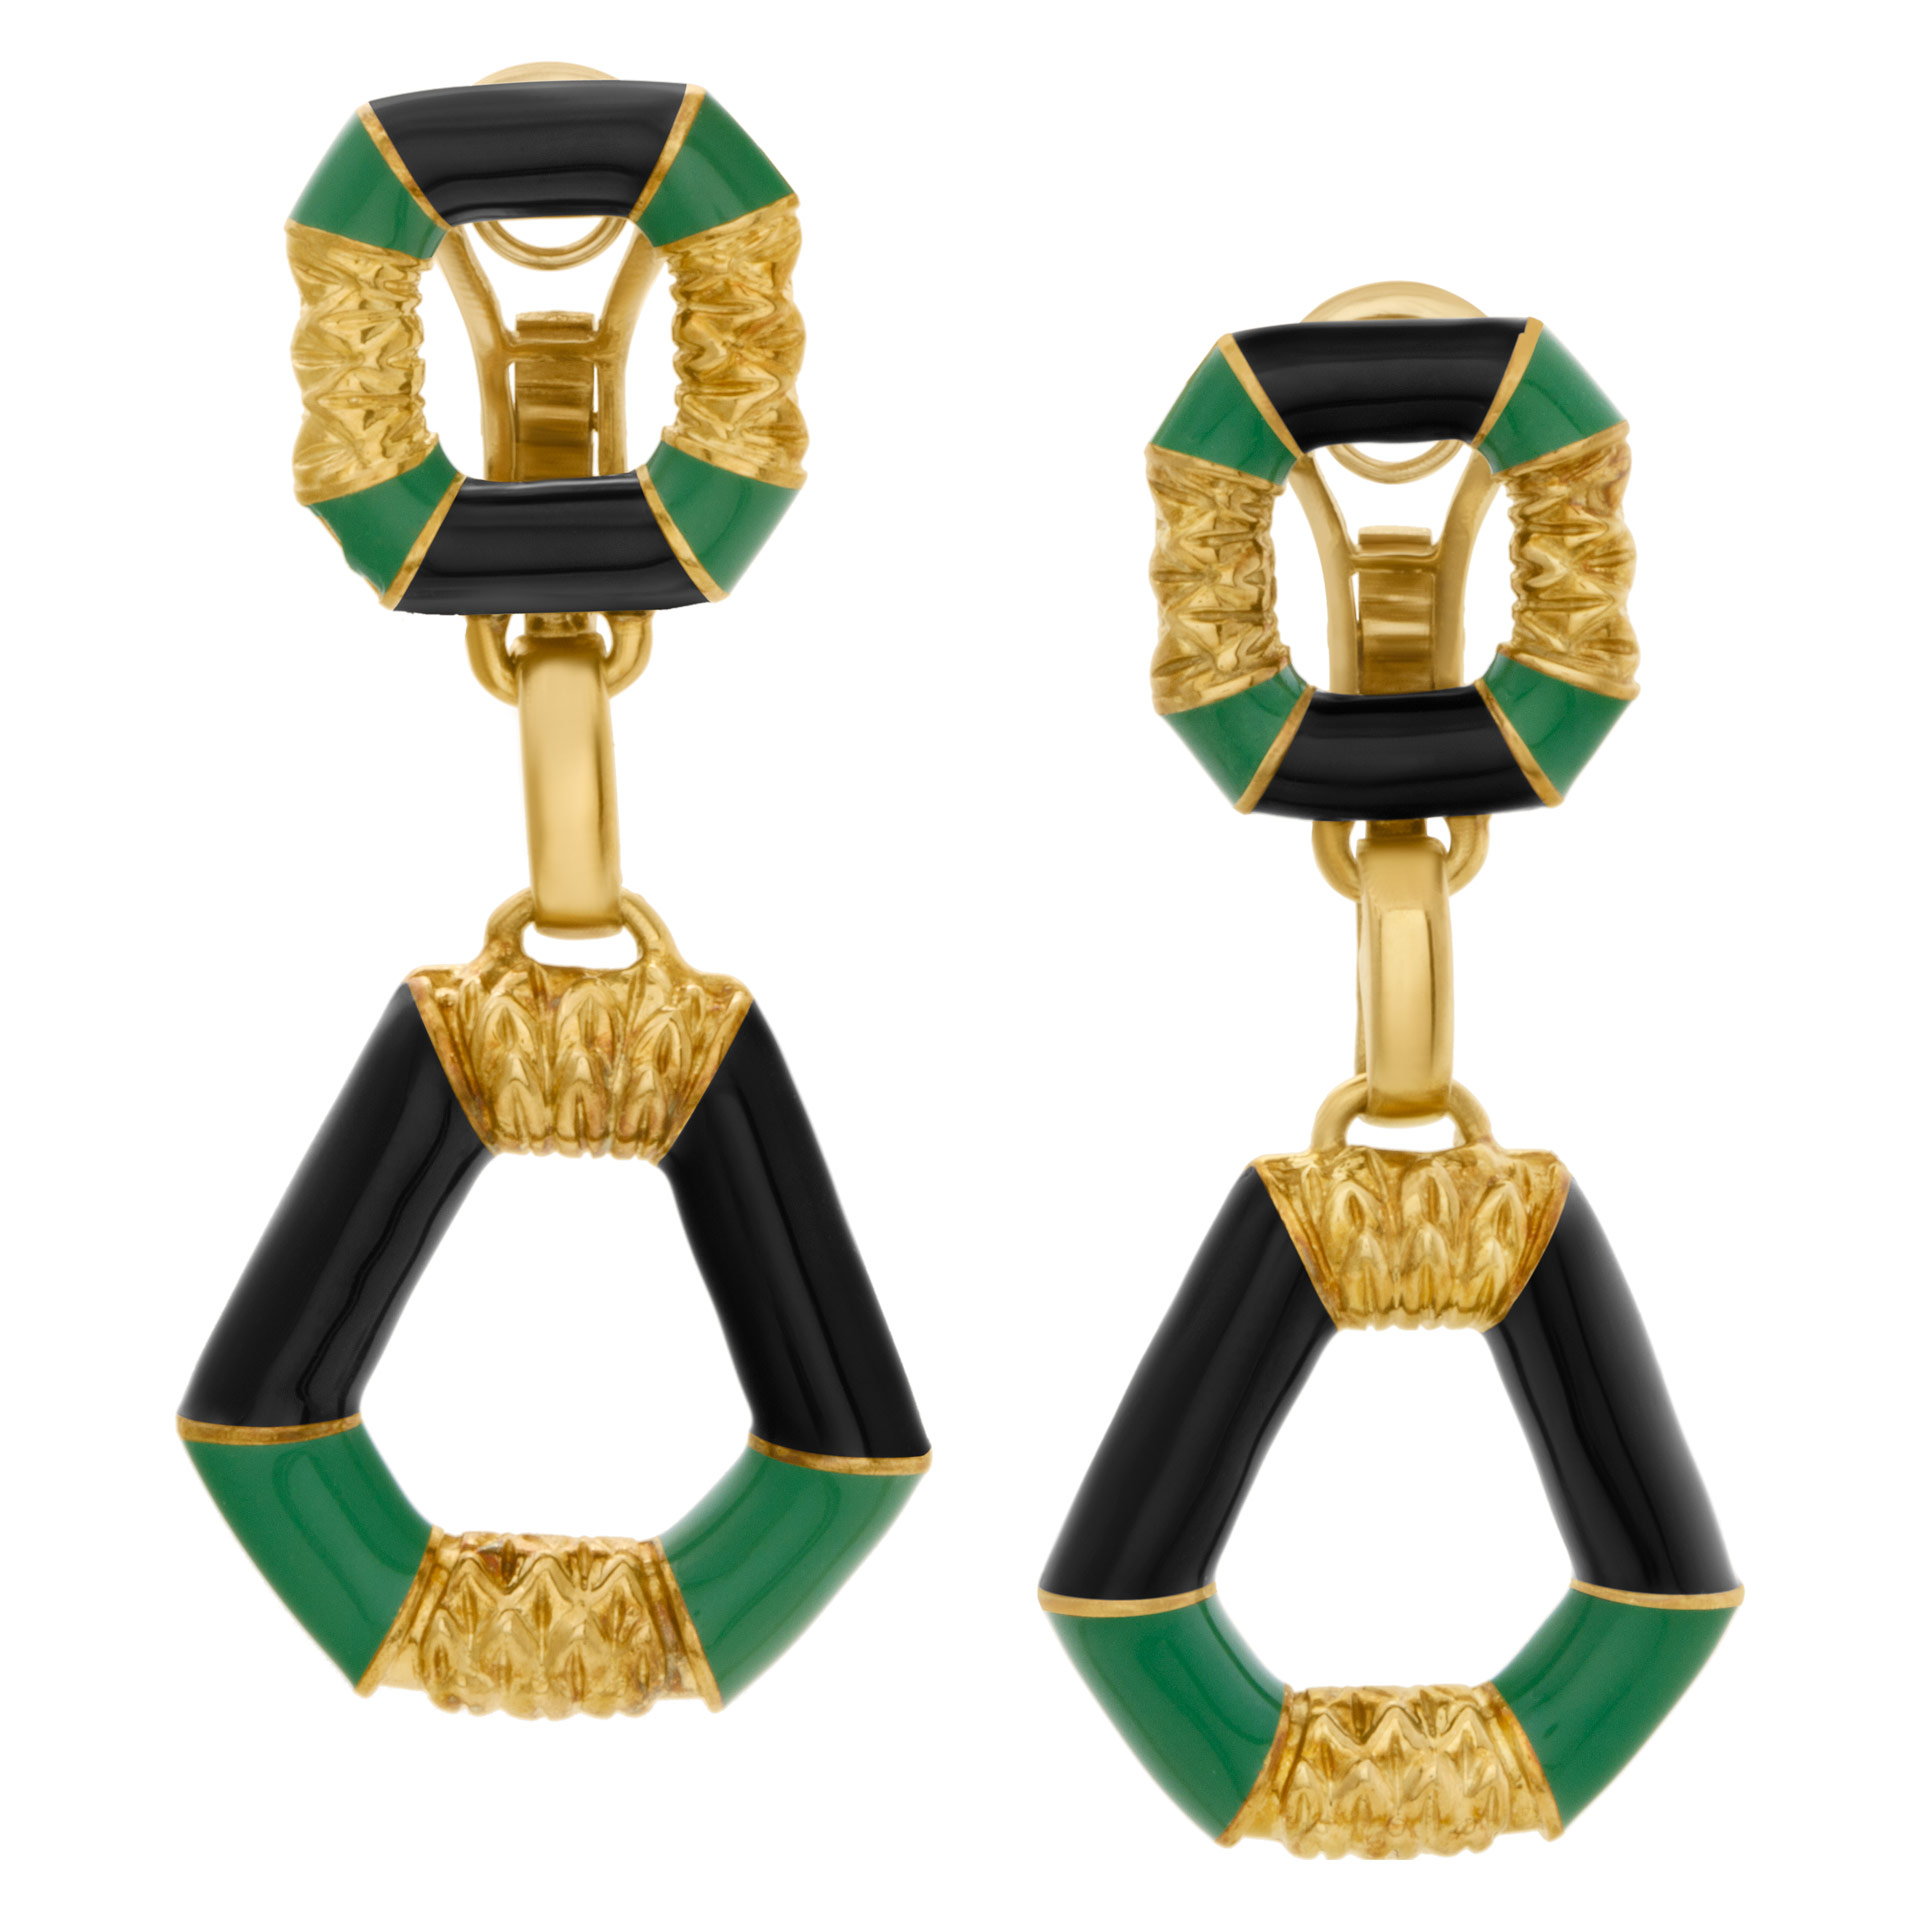 Colorful and fluted green and black enamel dangling earrings in 18k